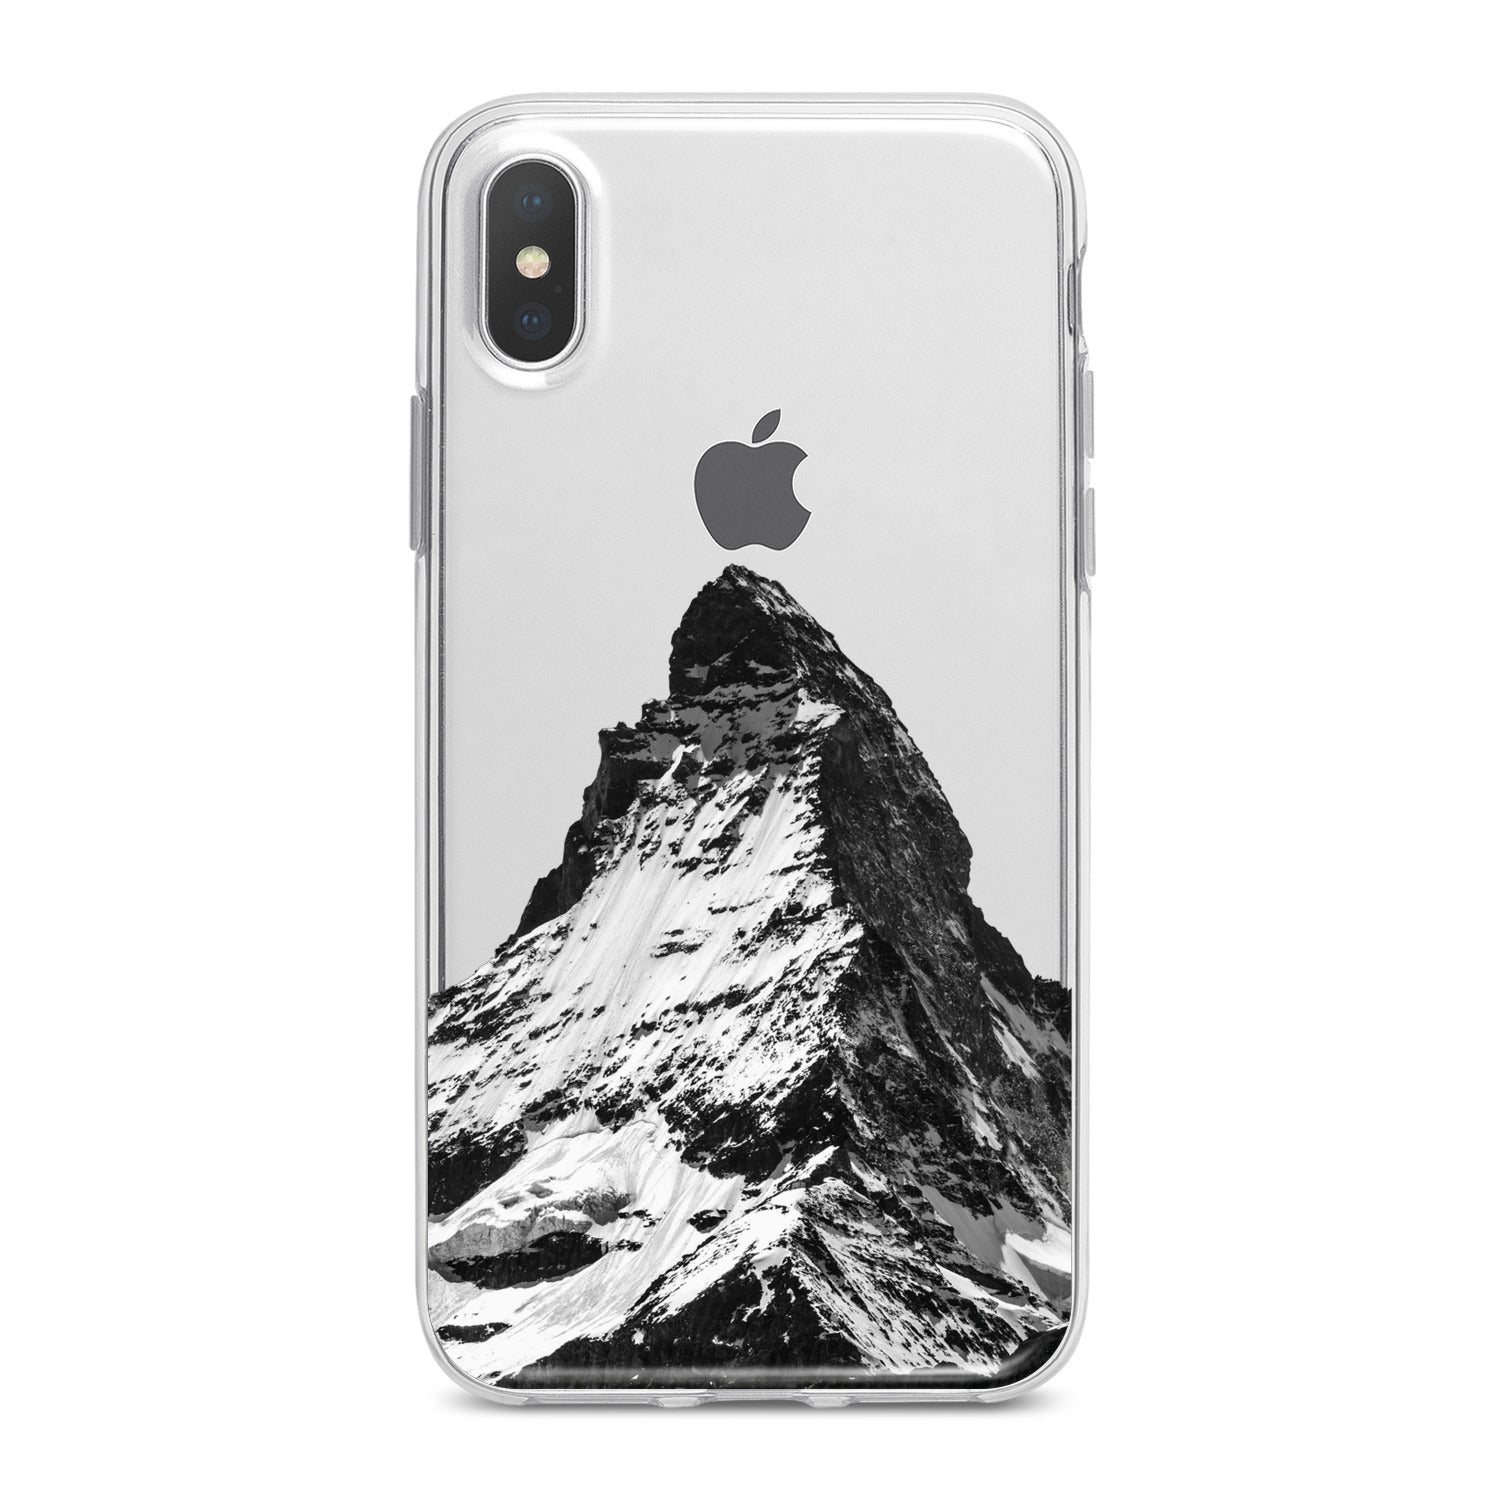 Lex Altern Snowy Mountain Phone Case for your iPhone & Android phone.